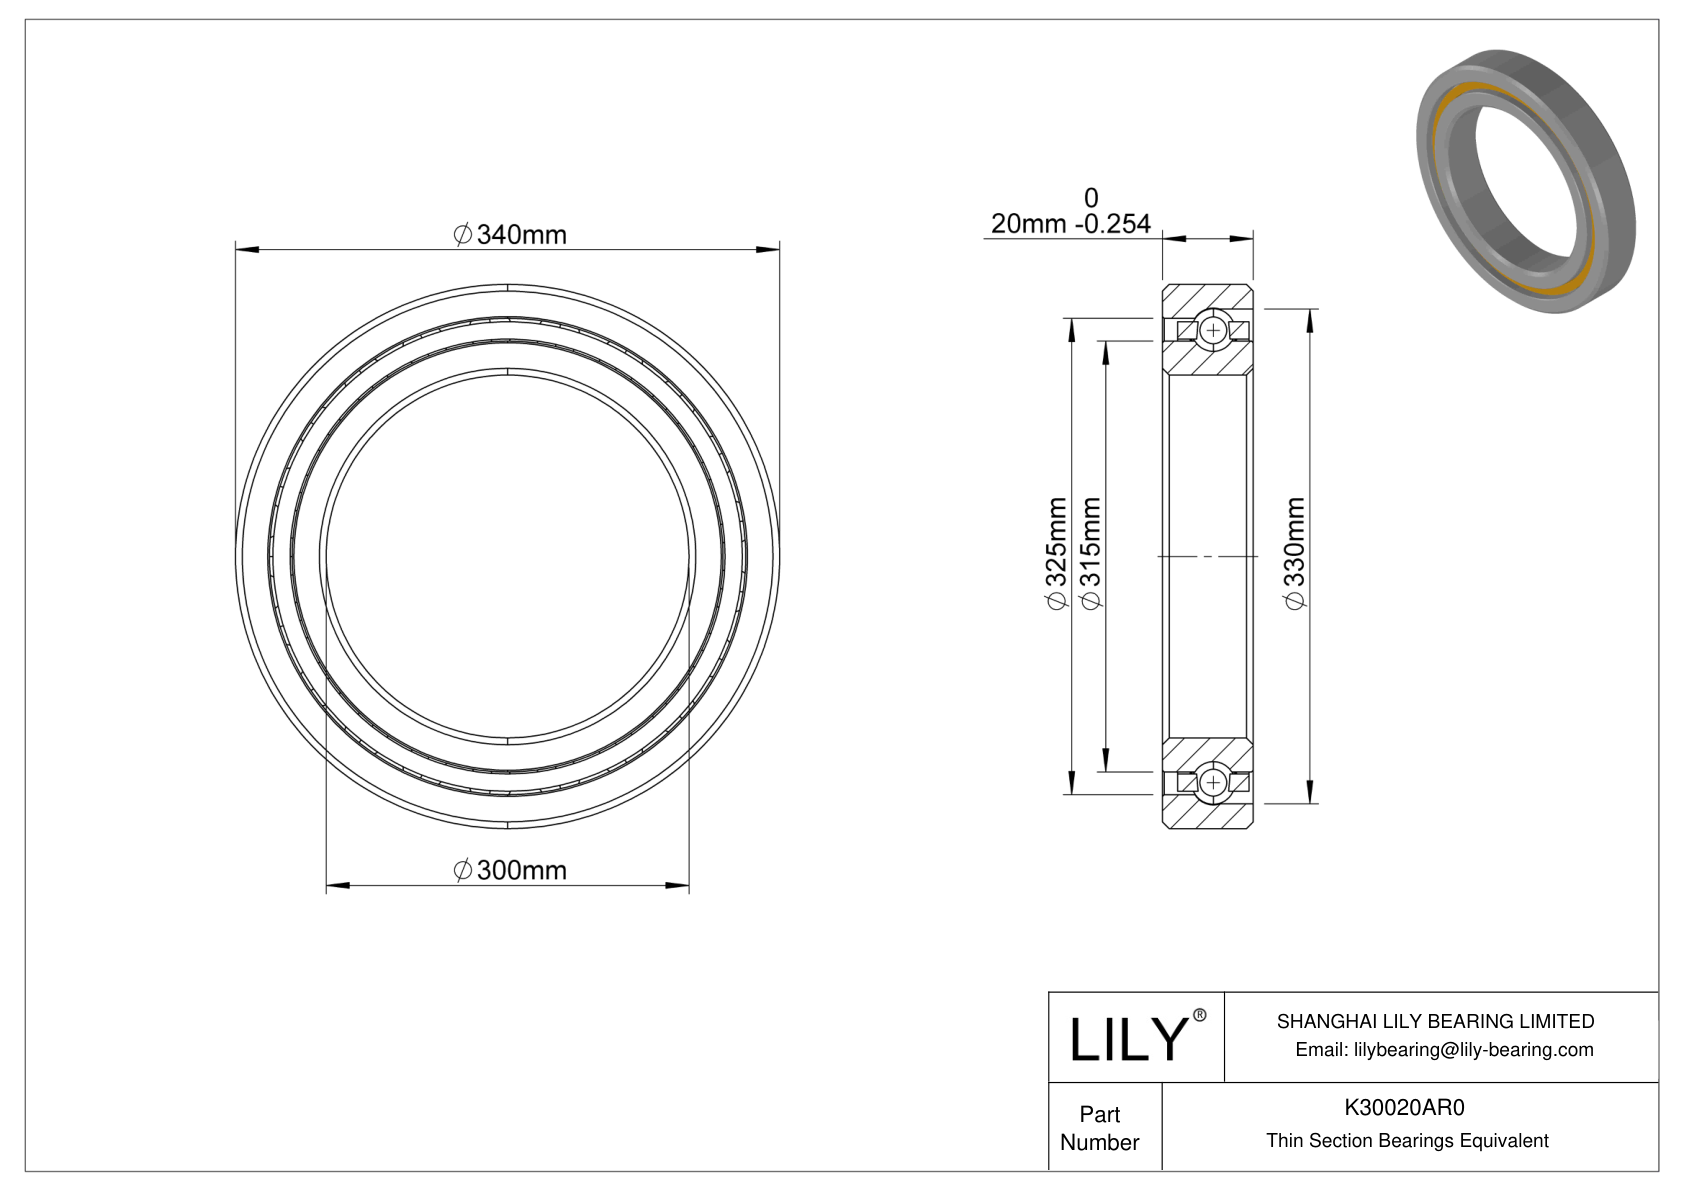 K30020AR0 Constant Section (CS) Bearings cad drawing